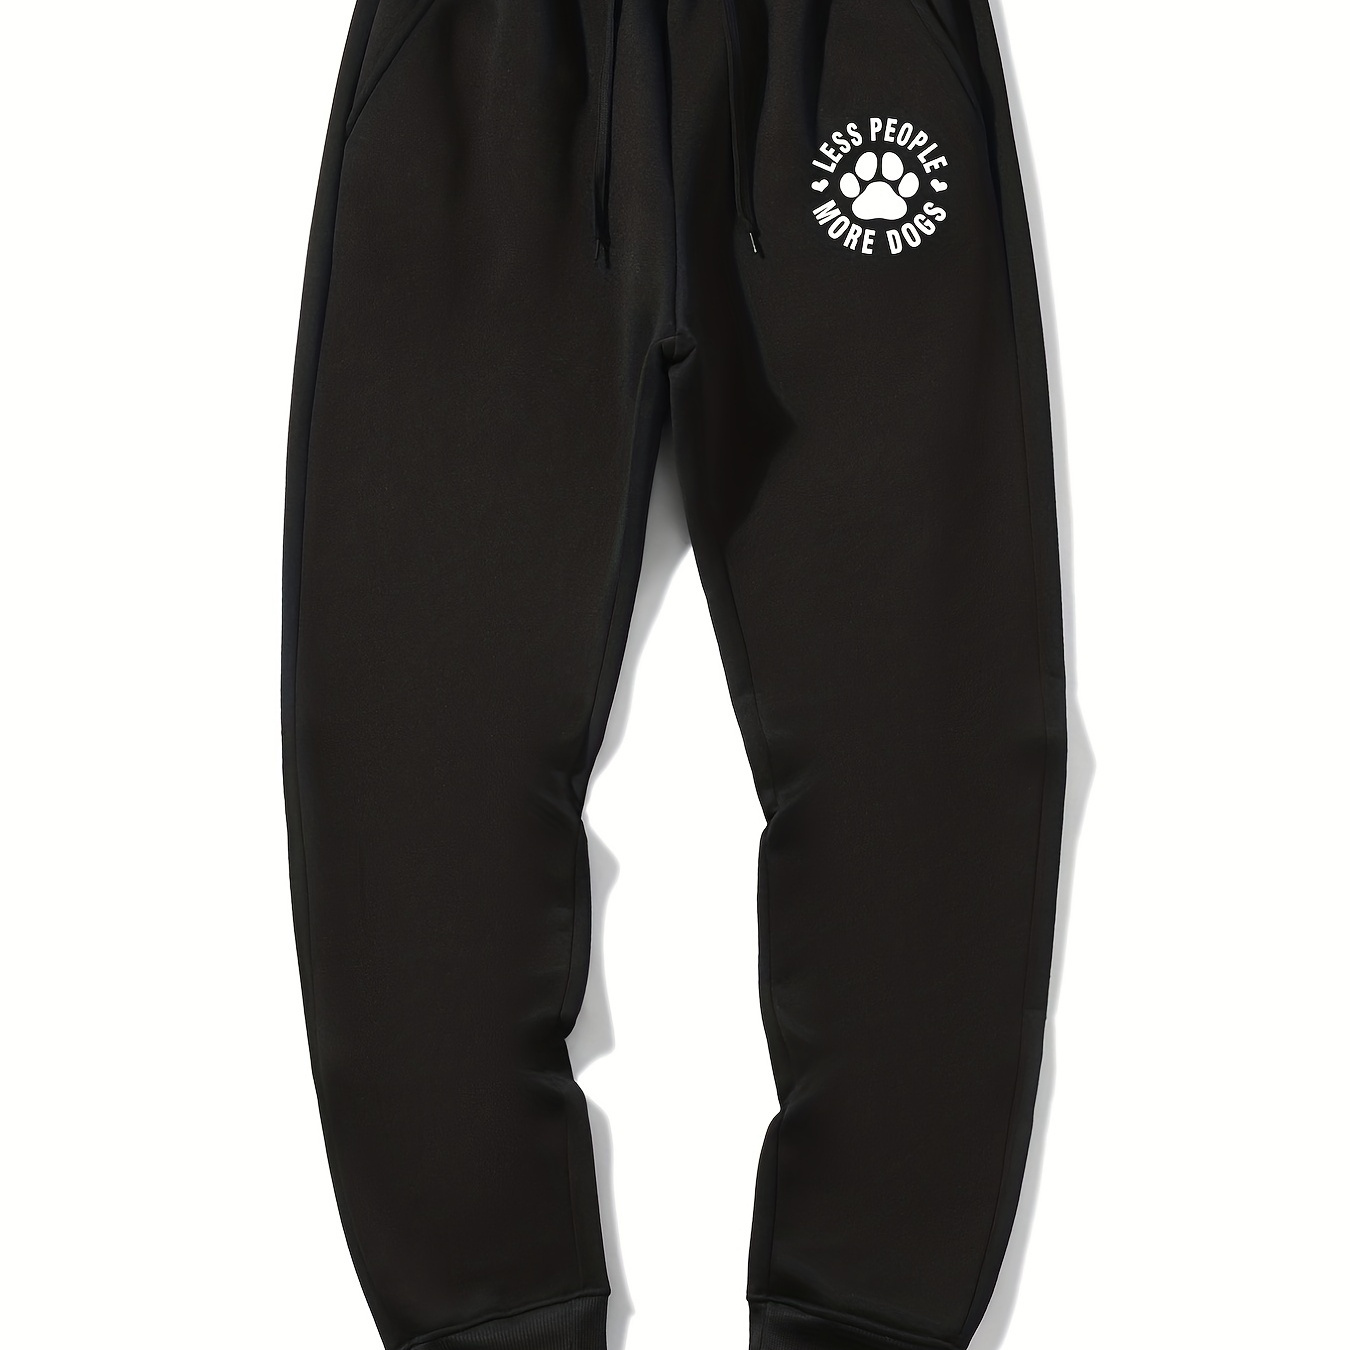 

''less People More Dogs'' Dog Paw Print Men's Drawstring Sweatpants With Pockets, Loose Casual Comfy Jogger Pants